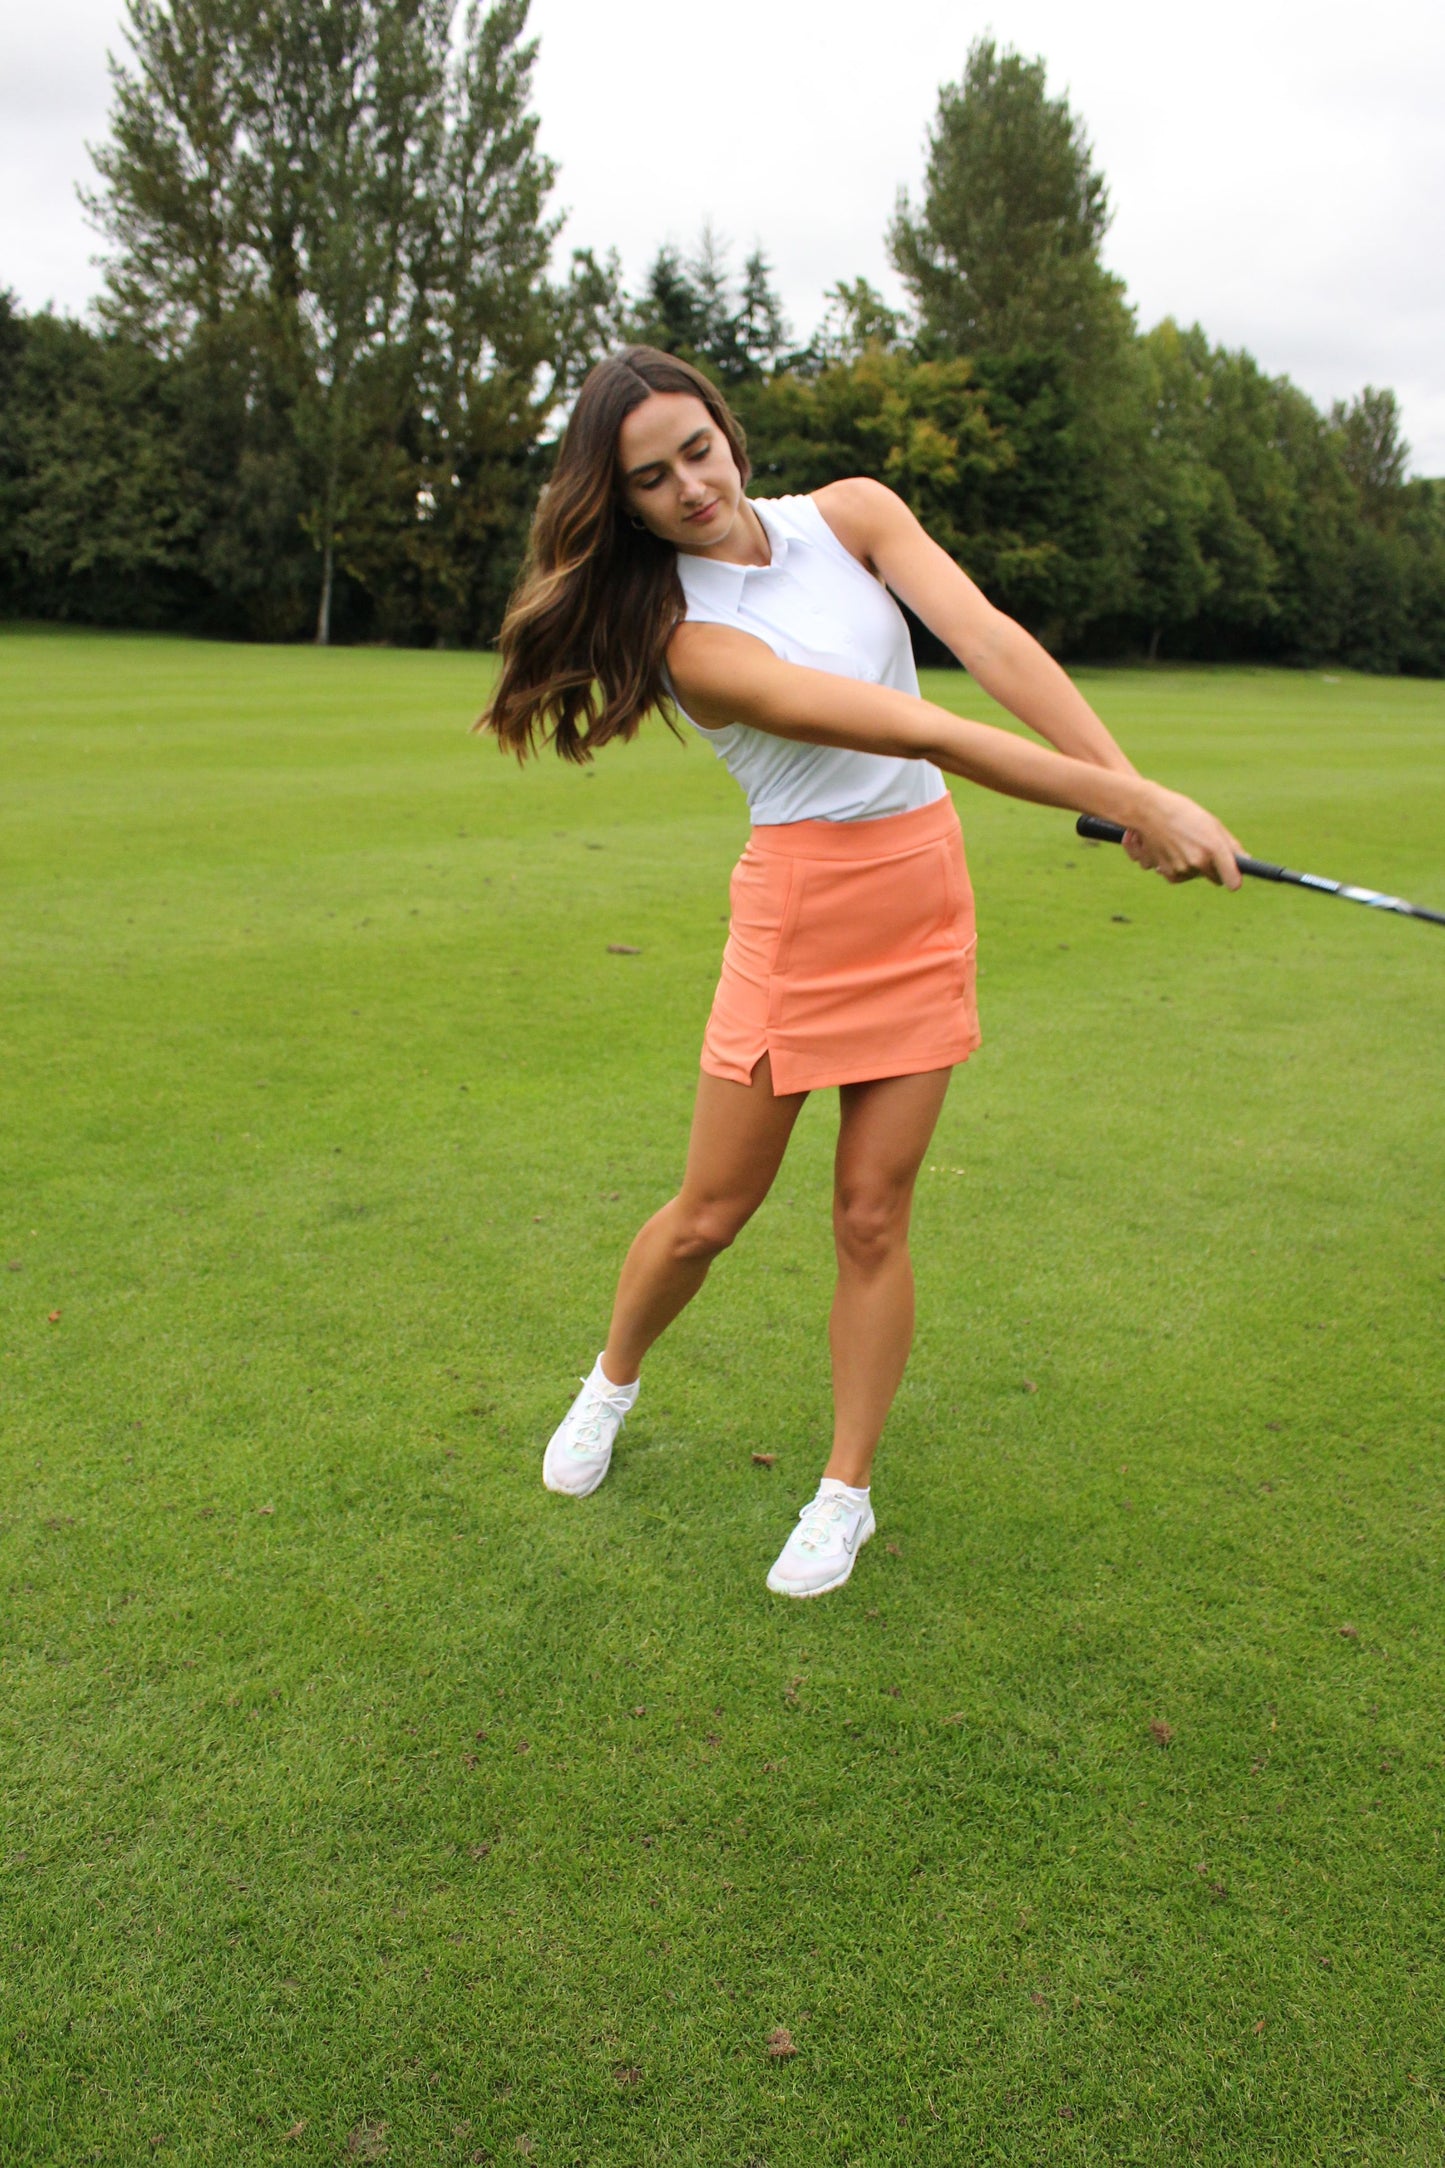 AWGO Golf Coral Skort on female golfer Women's high-waisted golf skort in coral Performance golf skirt with stretchy fabric Close-up of pocketed golf skort in coral Female golfer wearing AWGO Golf Coral Skort Stylish women's golf apparel in coral Sporty golf outfit with high-waisted skort Golf skort with convenient pockets AWGO Golf Coral Skort for female golfers Coral golf skort for performance and style Woman playing golf in Golf Skort Woman Swinging Golf Club Woman making golf shot in golf skirt